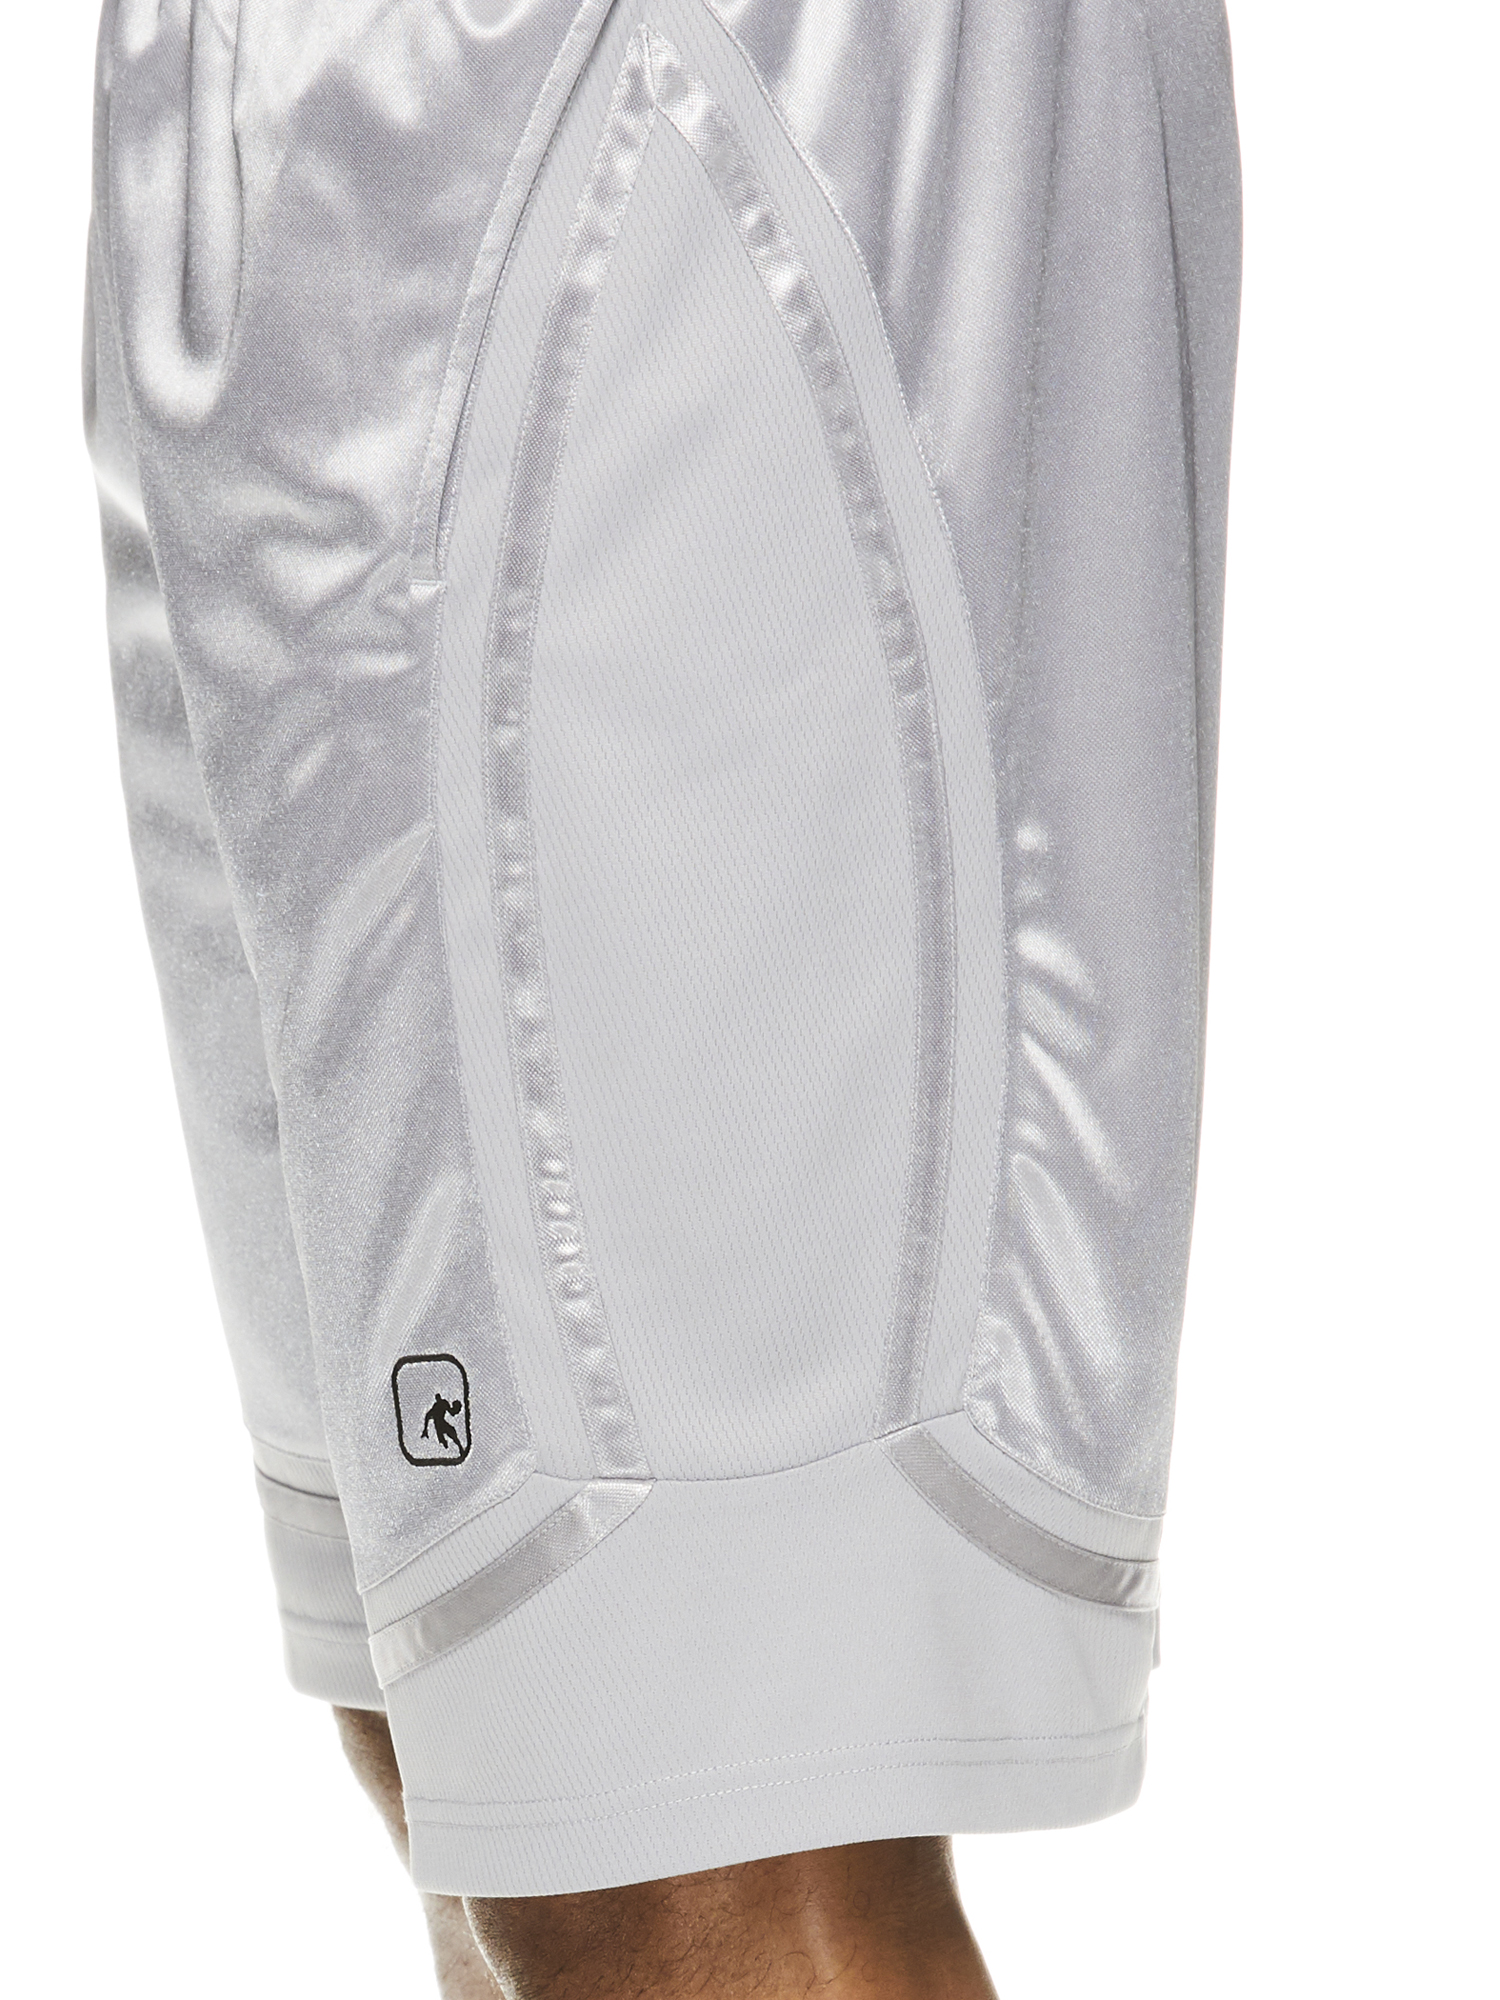 AND1 Men's and Big Men's Active Core 11" Home Court Basketball Shorts, Sizes S-5XL - image 3 of 4